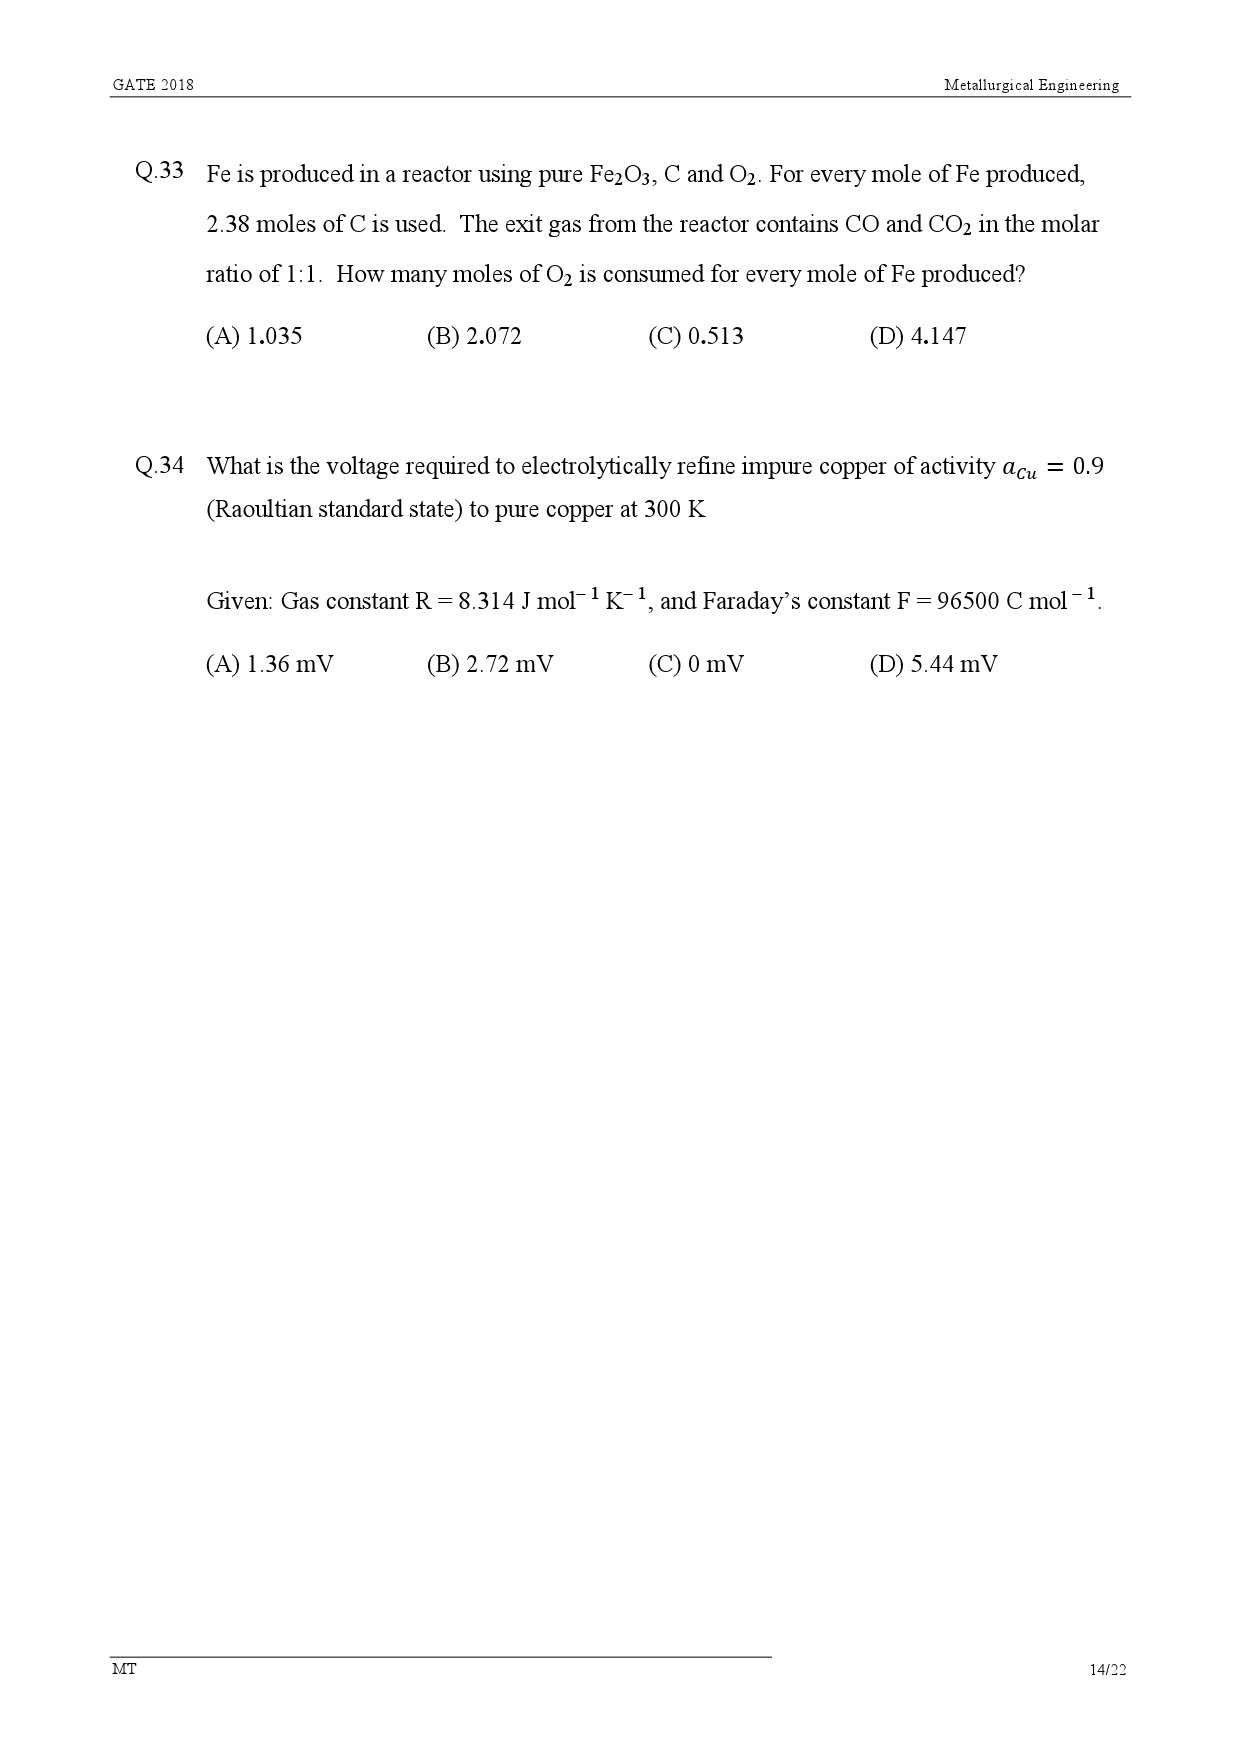 GATE Exam Question Paper 2018 Metallurgical Engineering 16